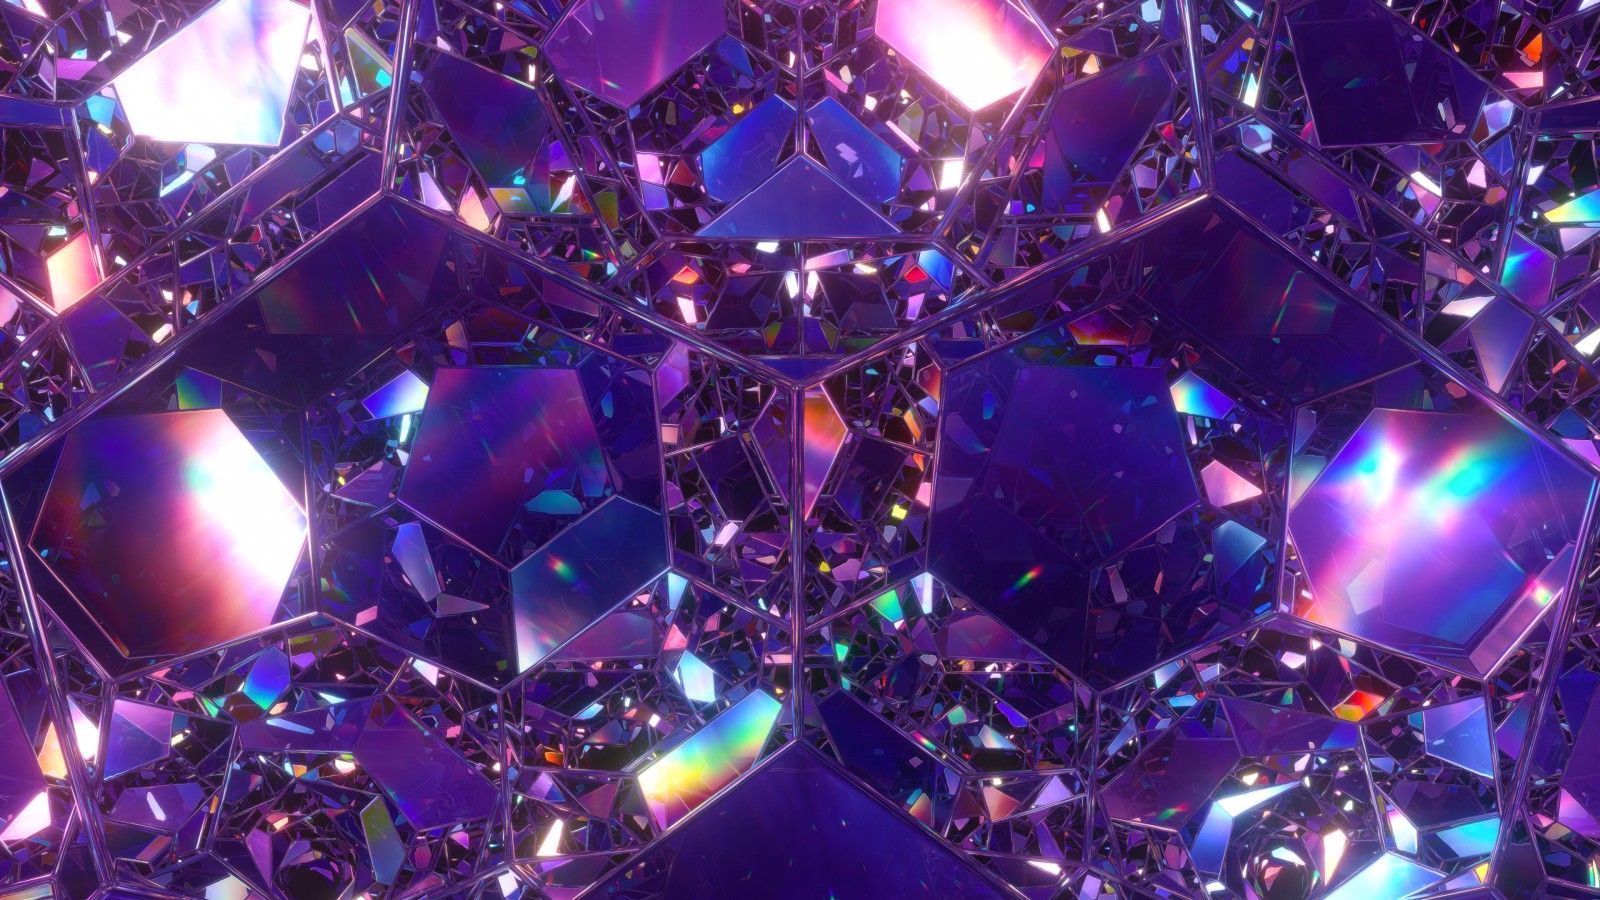 A kaleidoscope of purple and blue glass triangles - Glossy